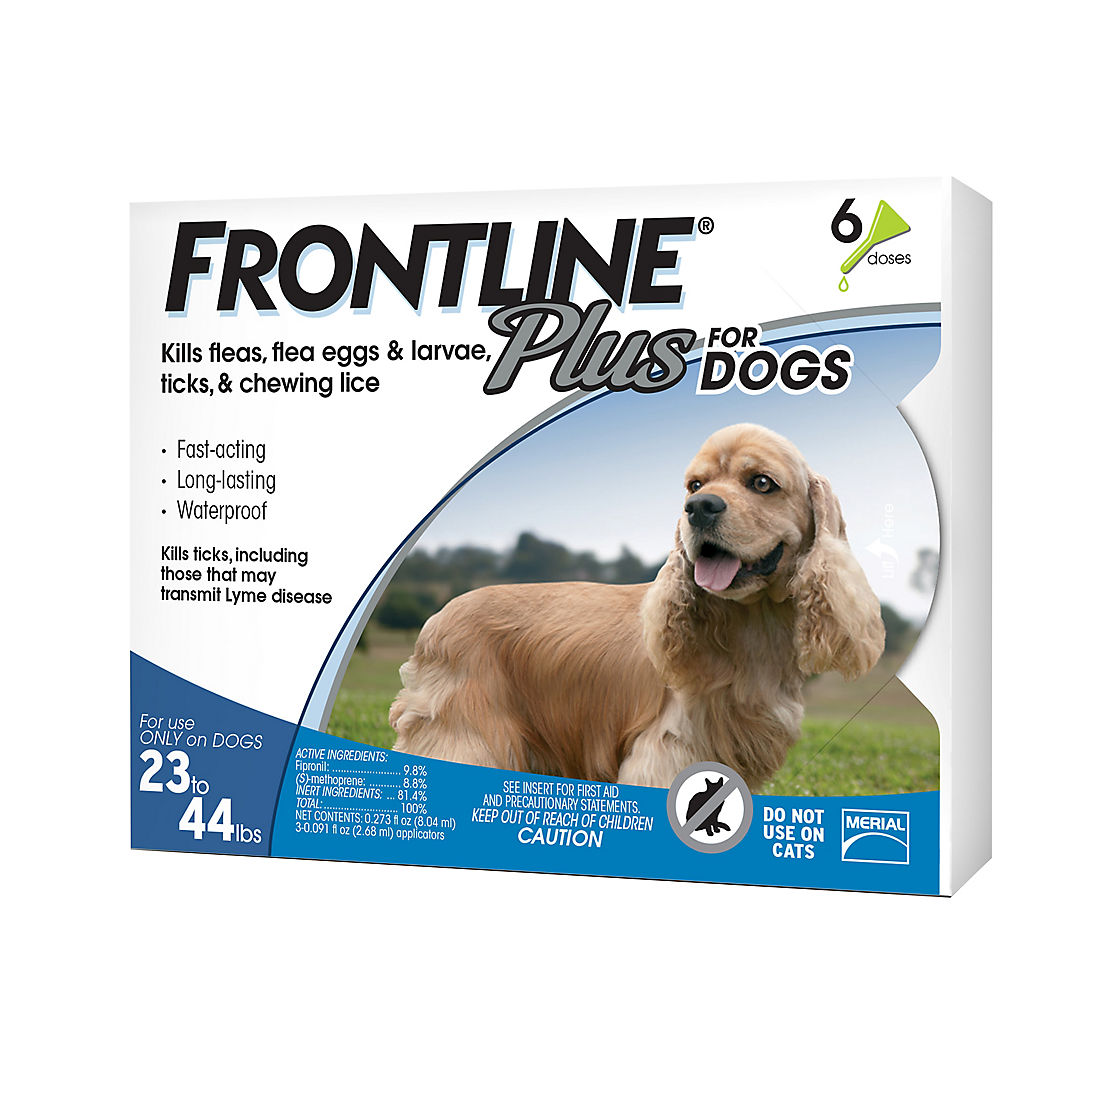 FRONTLINE Frontline Plus Medium Dog Blue 23-44lbs 6 doses Flea and Tick FREE SHIPPING 